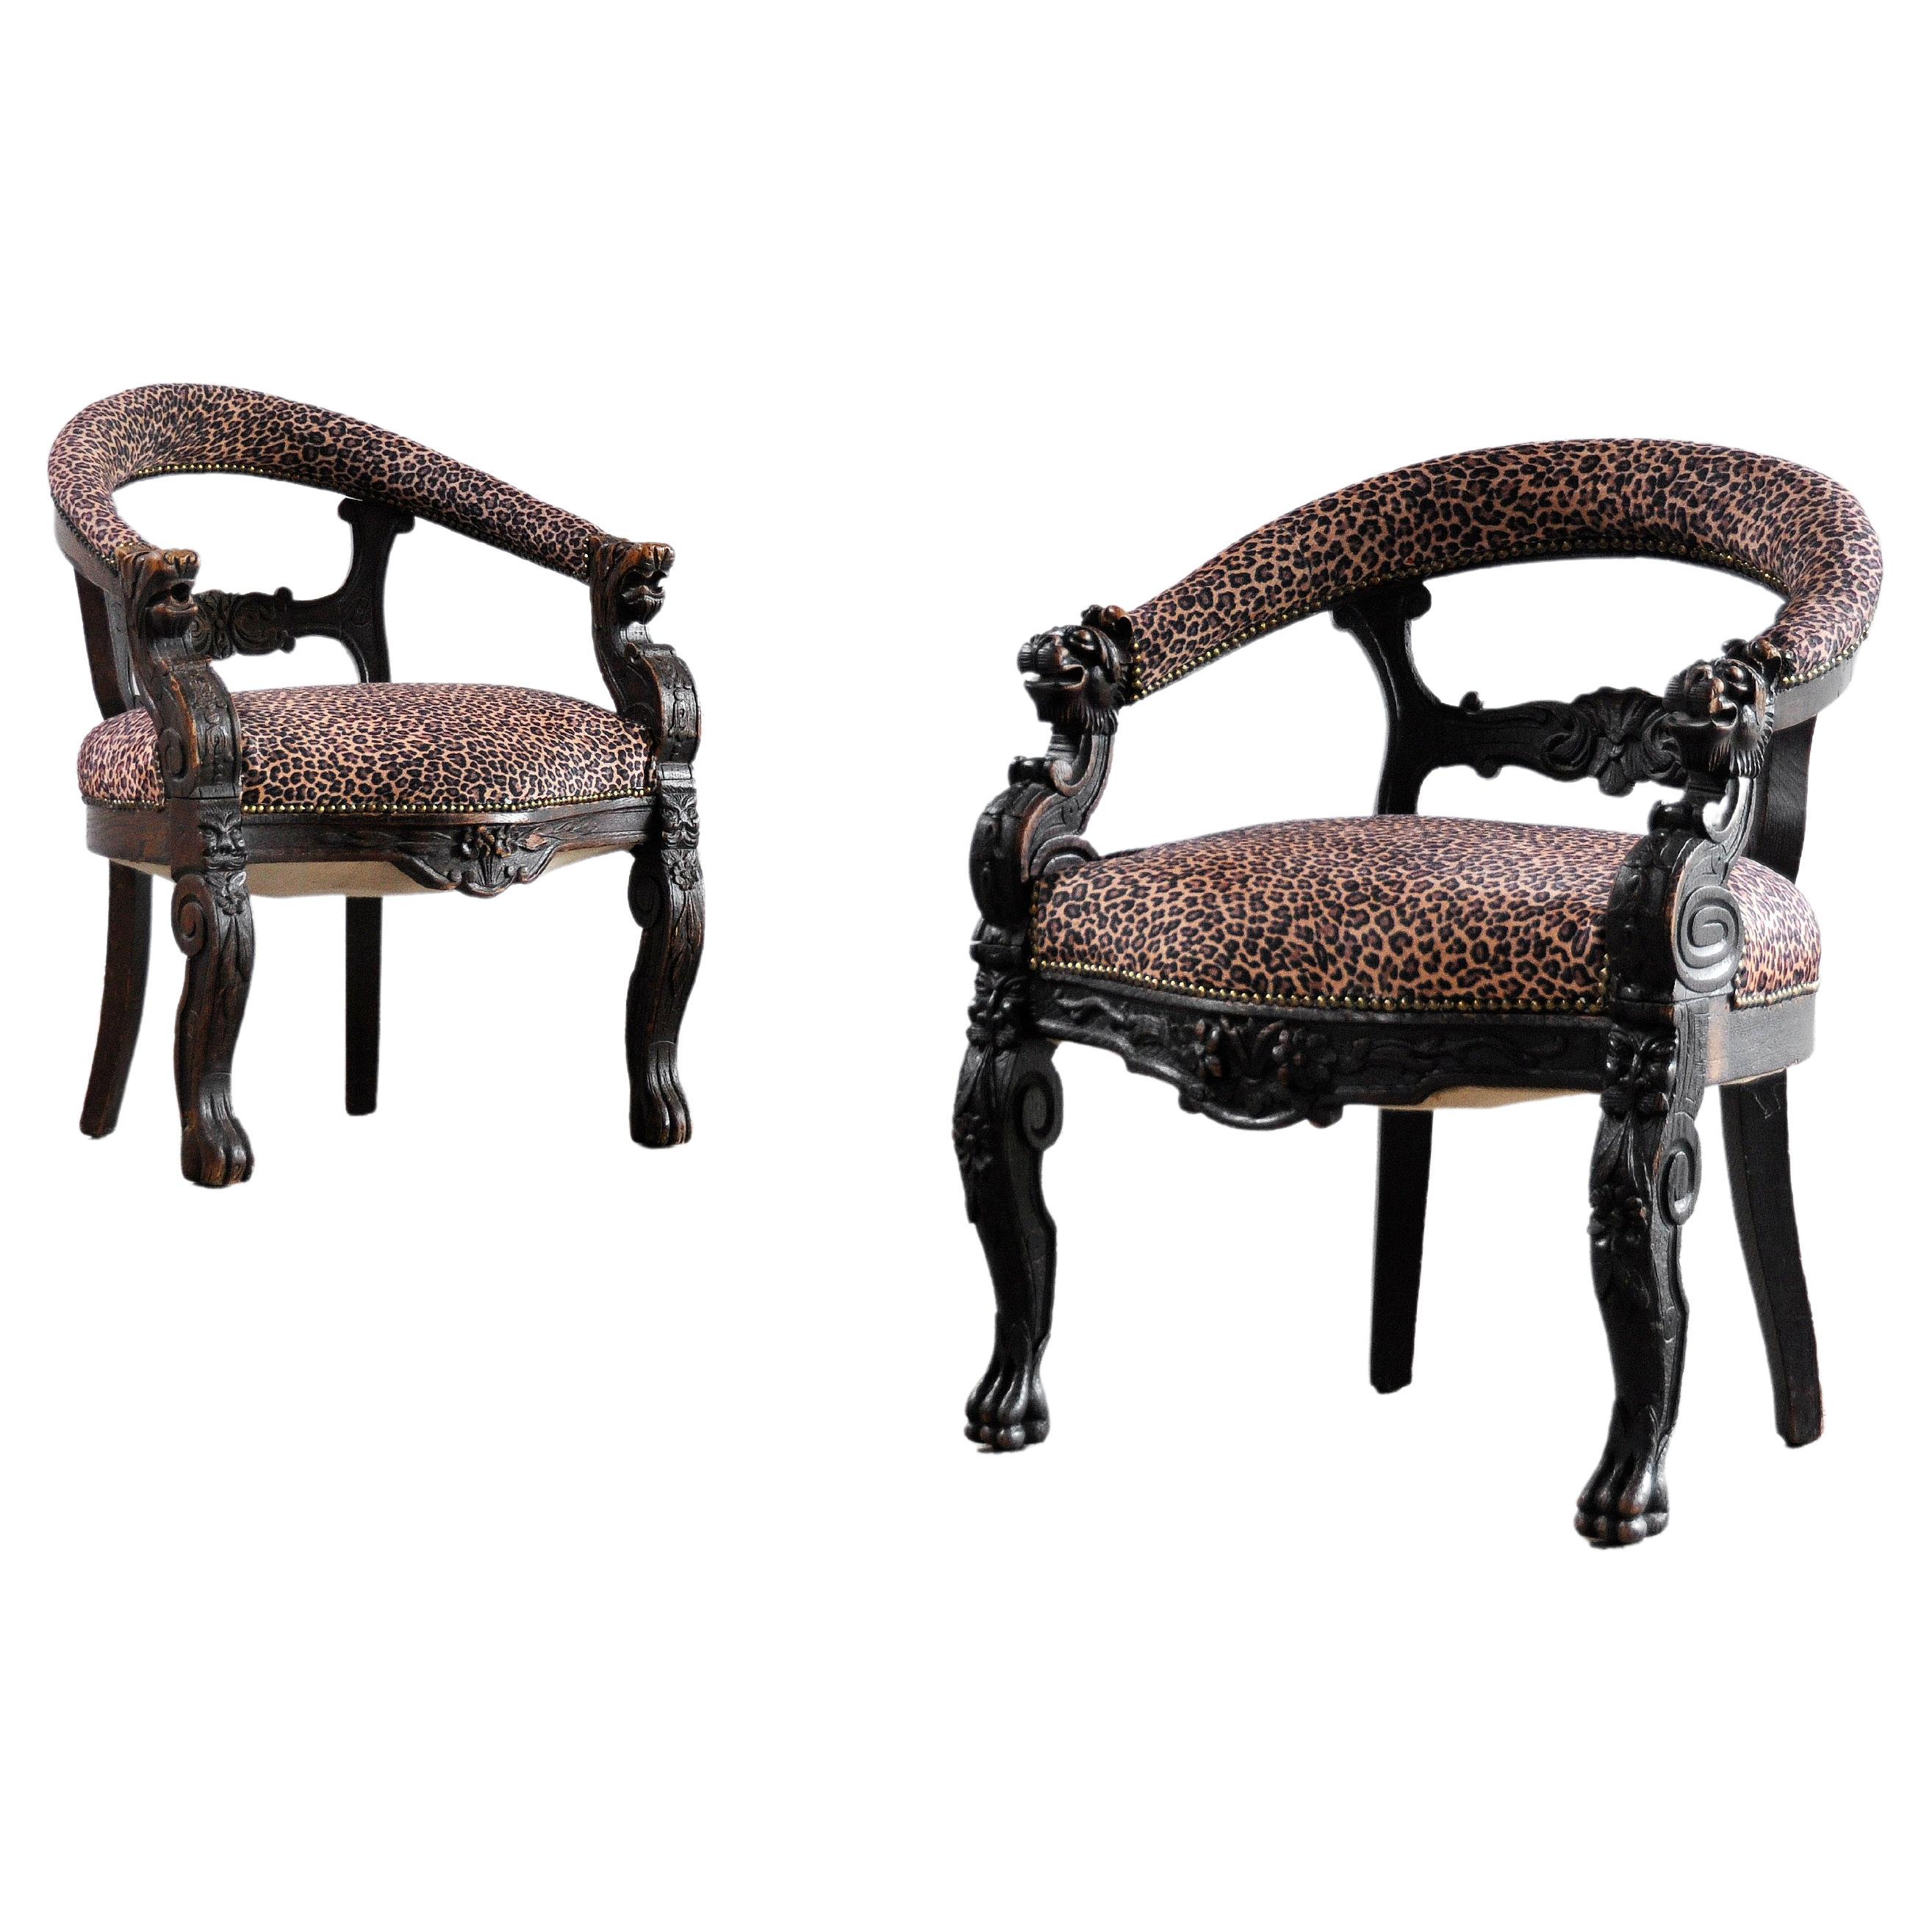 19th Century Carved Oak Tub Chairs with Leopard Print Upholstery, Set of 2 For Sale